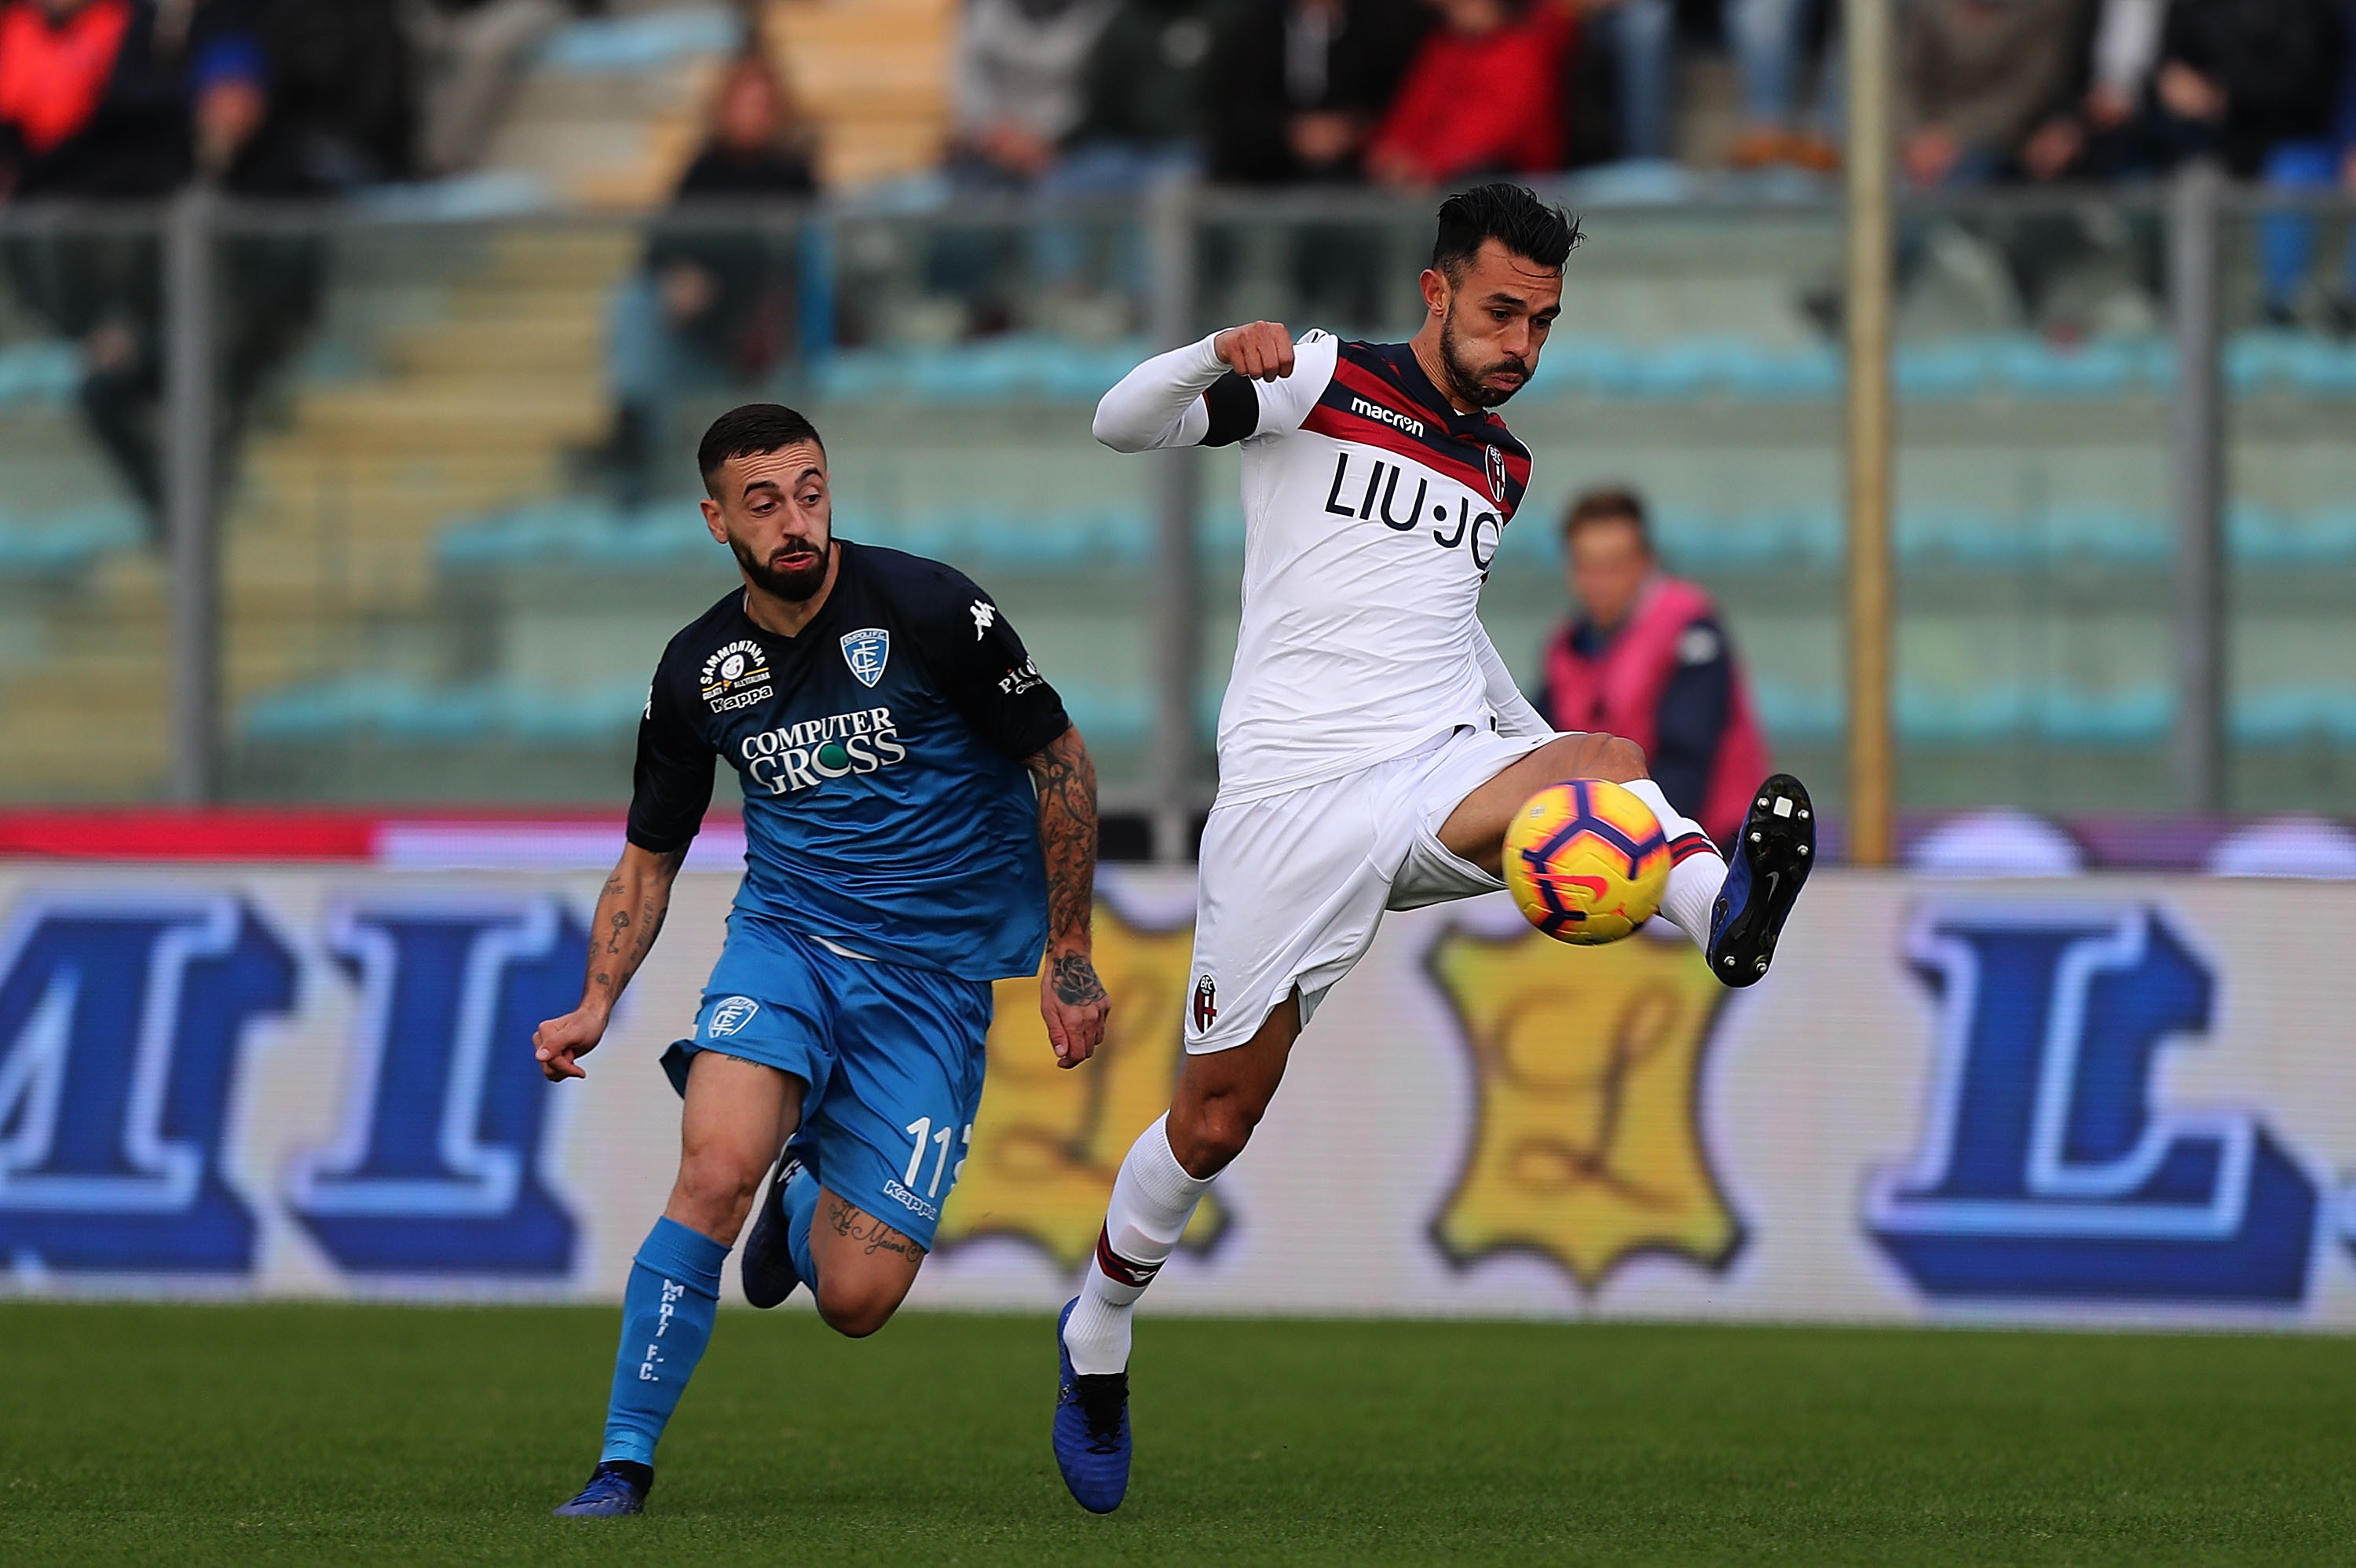 EMPOLI, ITALY - DECEMBER 09: Giancarlo Gonzalez of Bologna FC in action during the Serie A match between Empoli and Bologna FC at Stadio Carlo Castellani on December 9, 2018 in Empoli, Italy.  (Photo by Gabriele Maltinti/Getty Images)